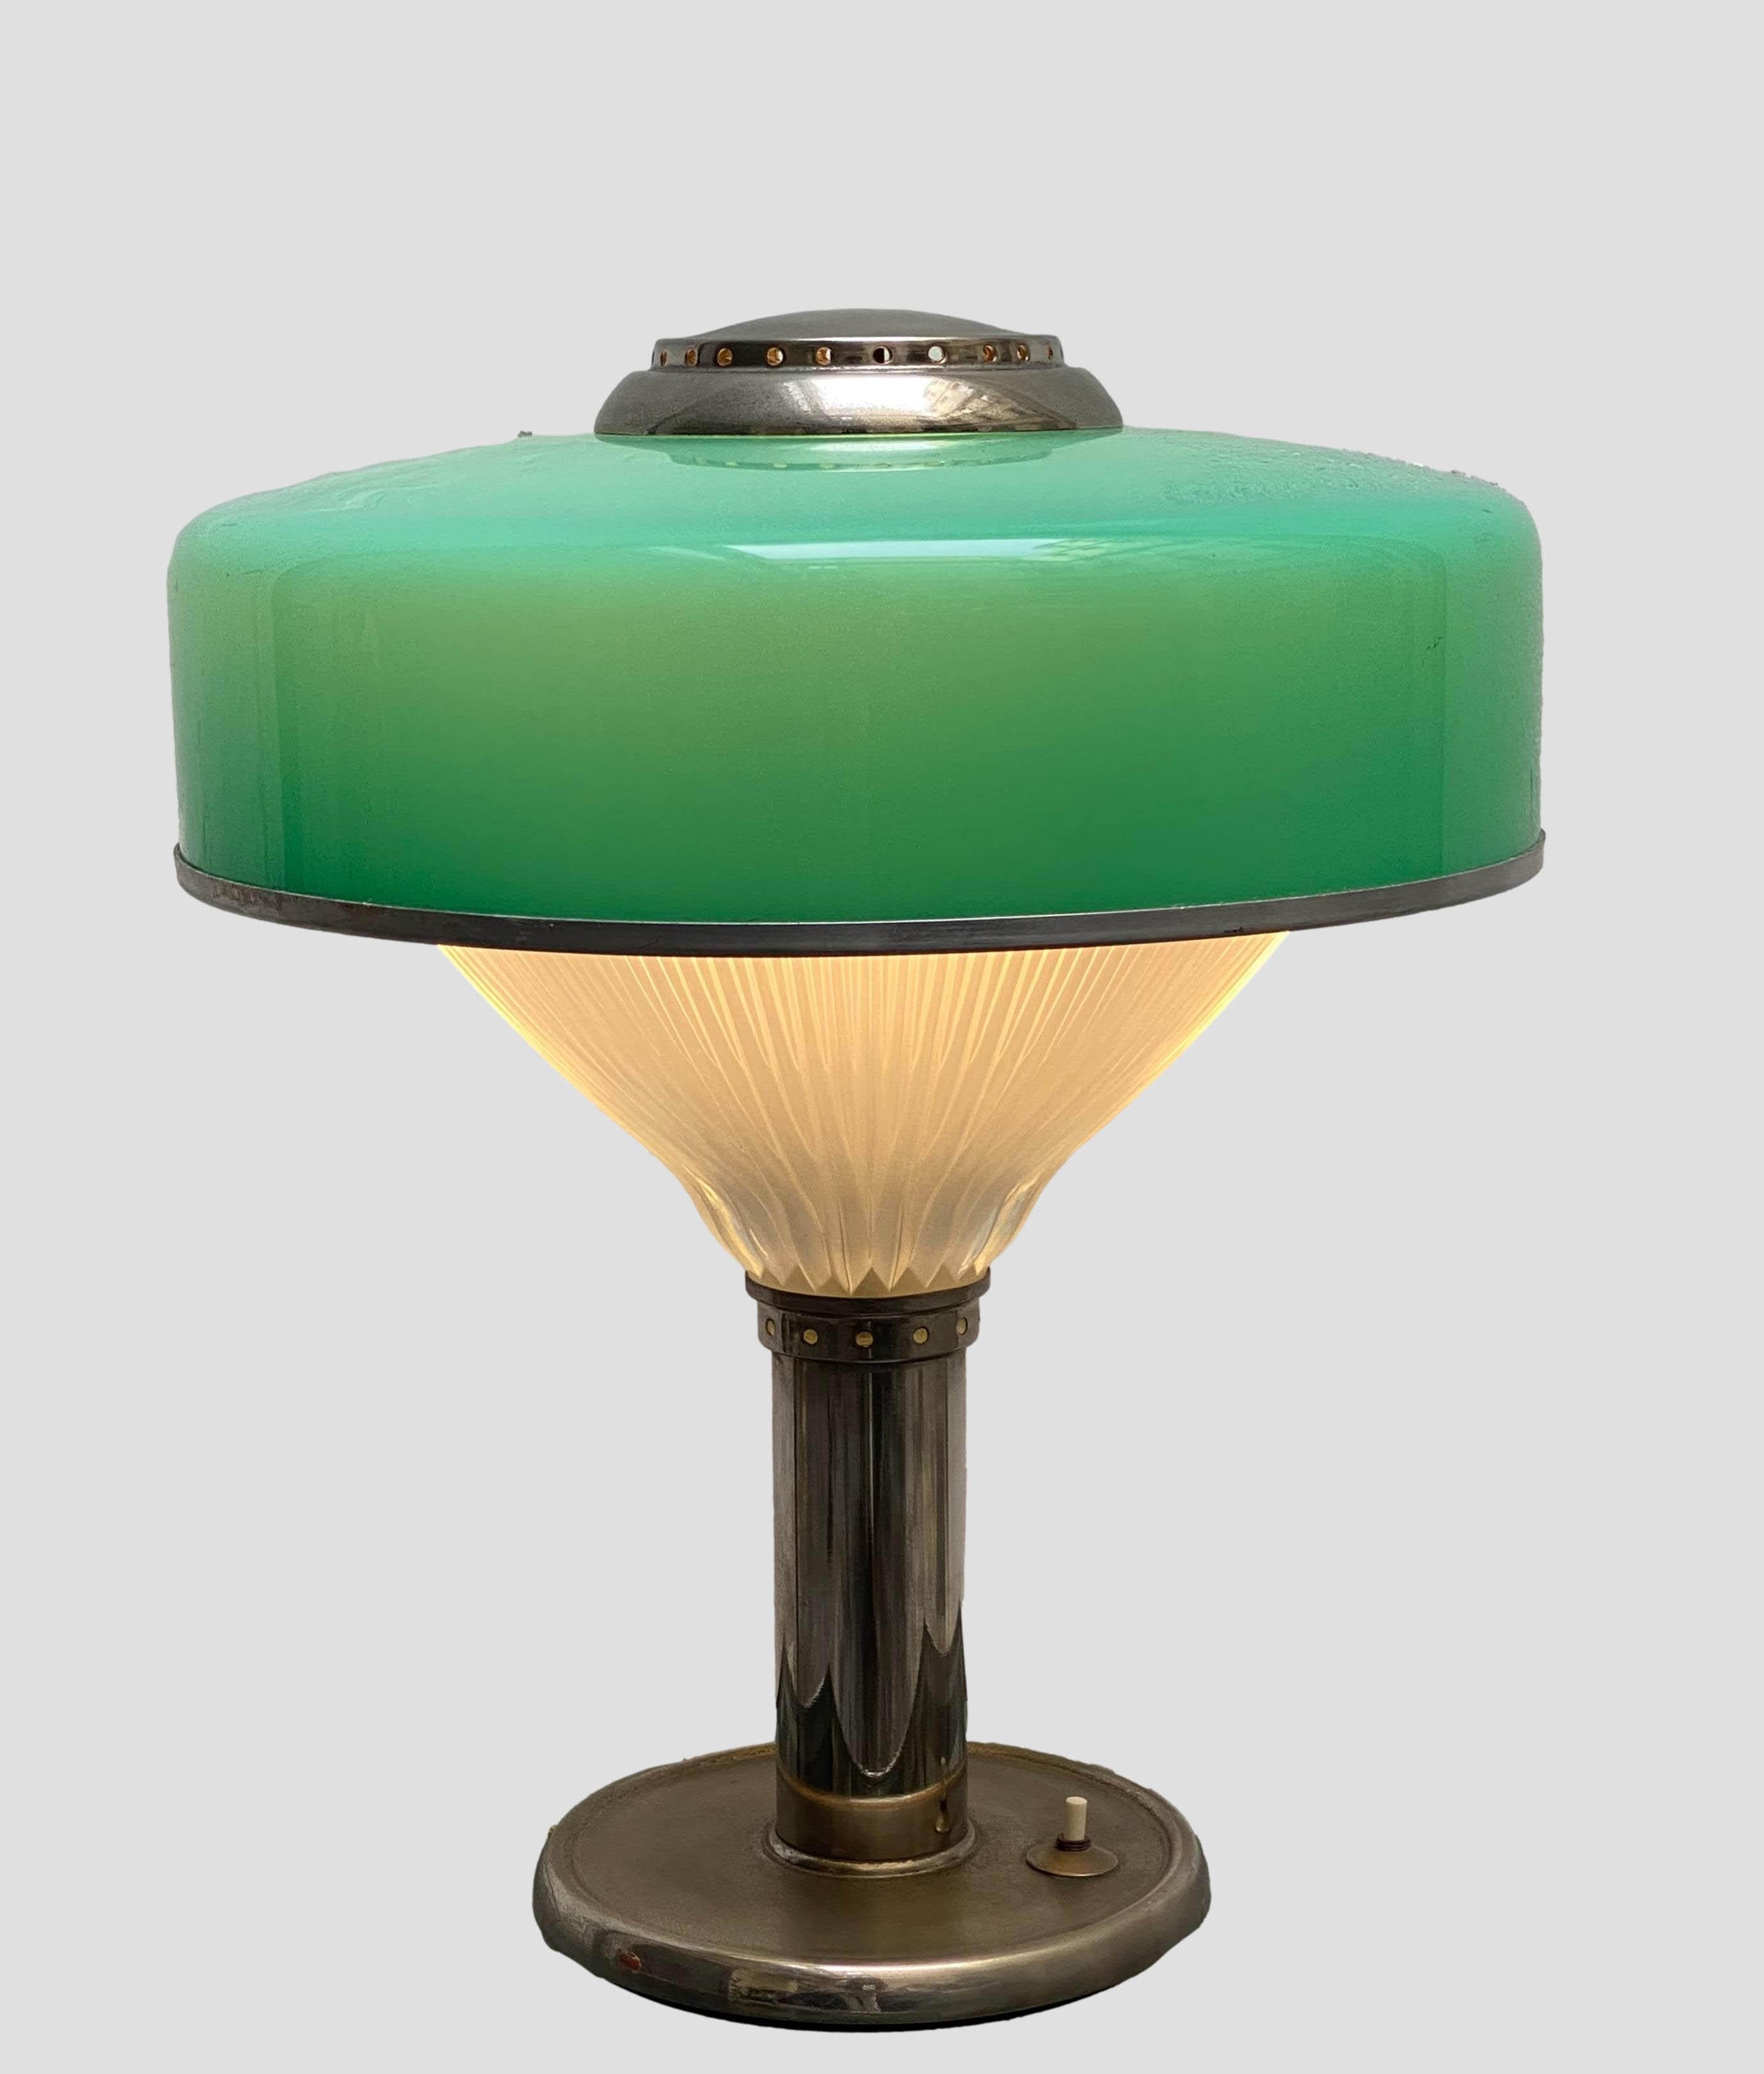 When the light is switched on, it produces a special atmosphere, from the double glass diffuser, top and bottomAn iconic and truly unique vintage table lamp.
This table lamp was designed by the renowned Italian architects' studio in the 1960s and